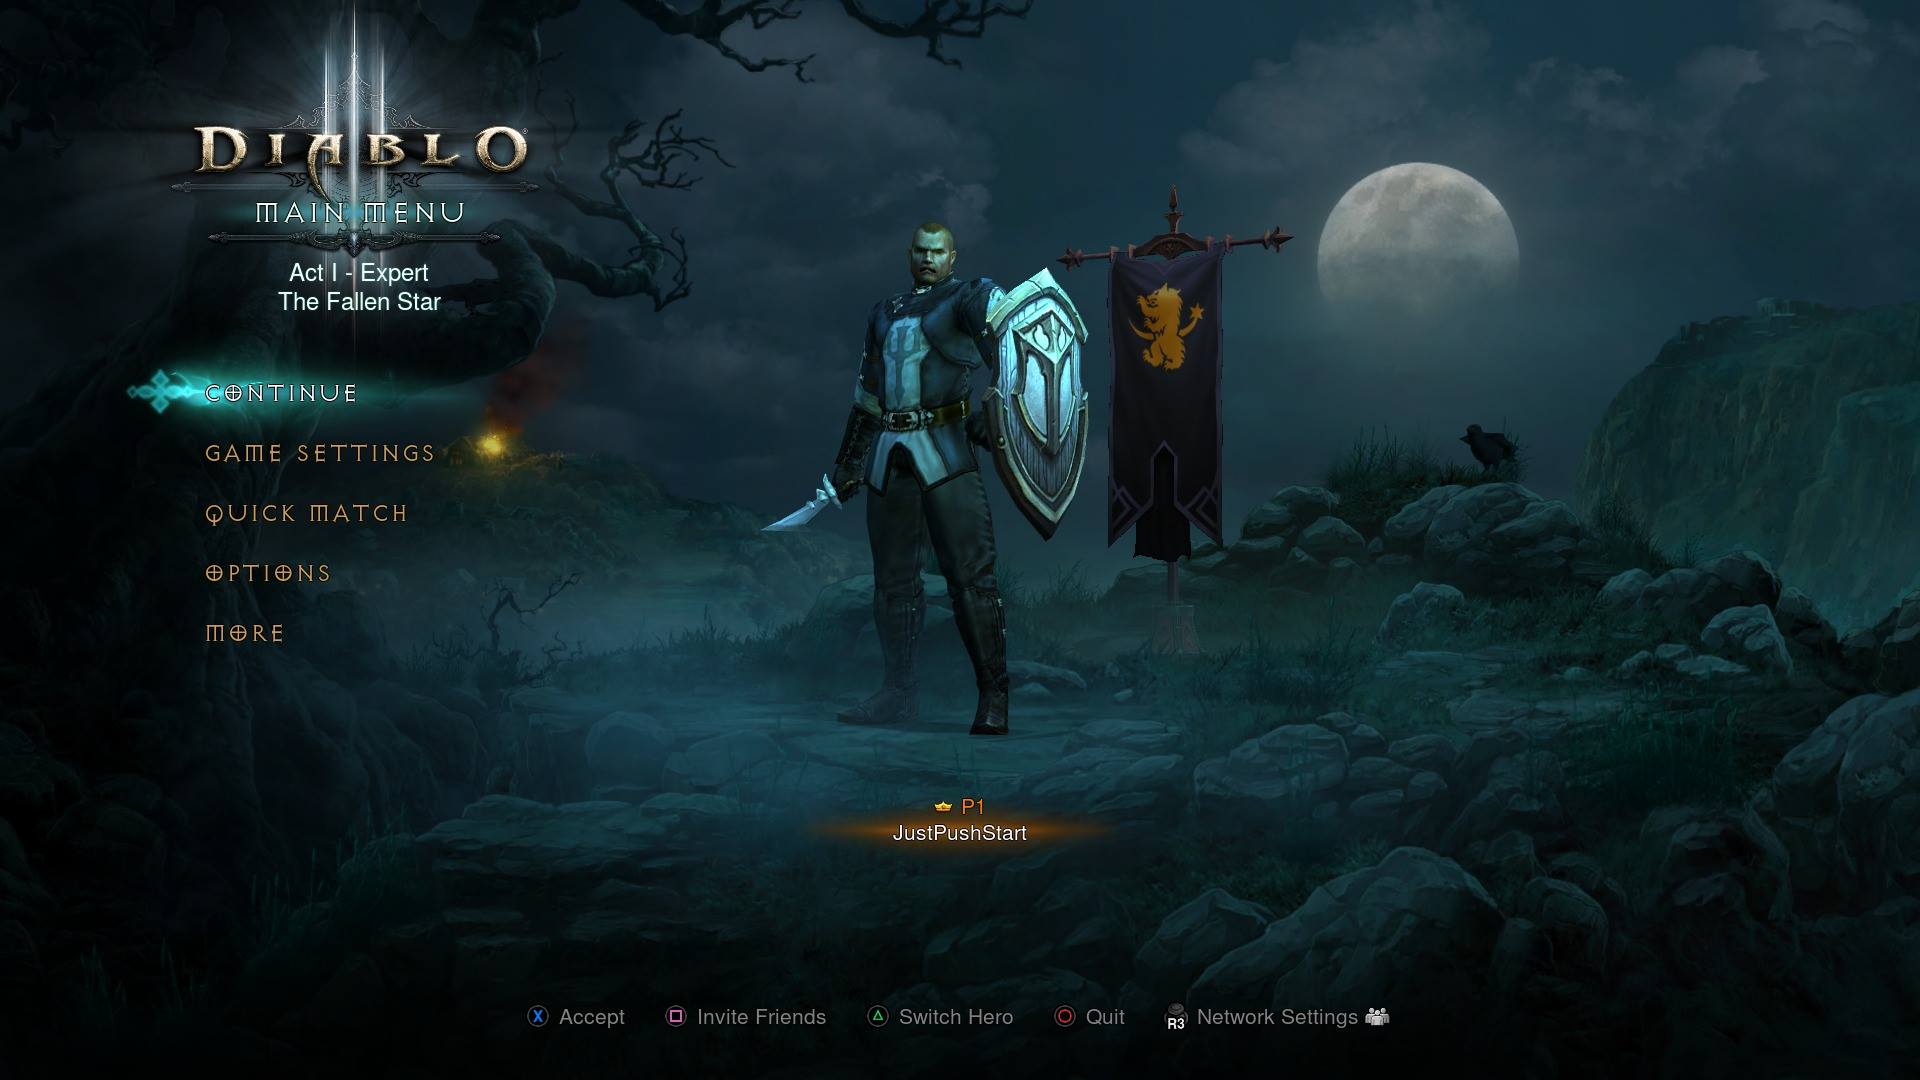 how to use xbox controller on diablo 3 pc